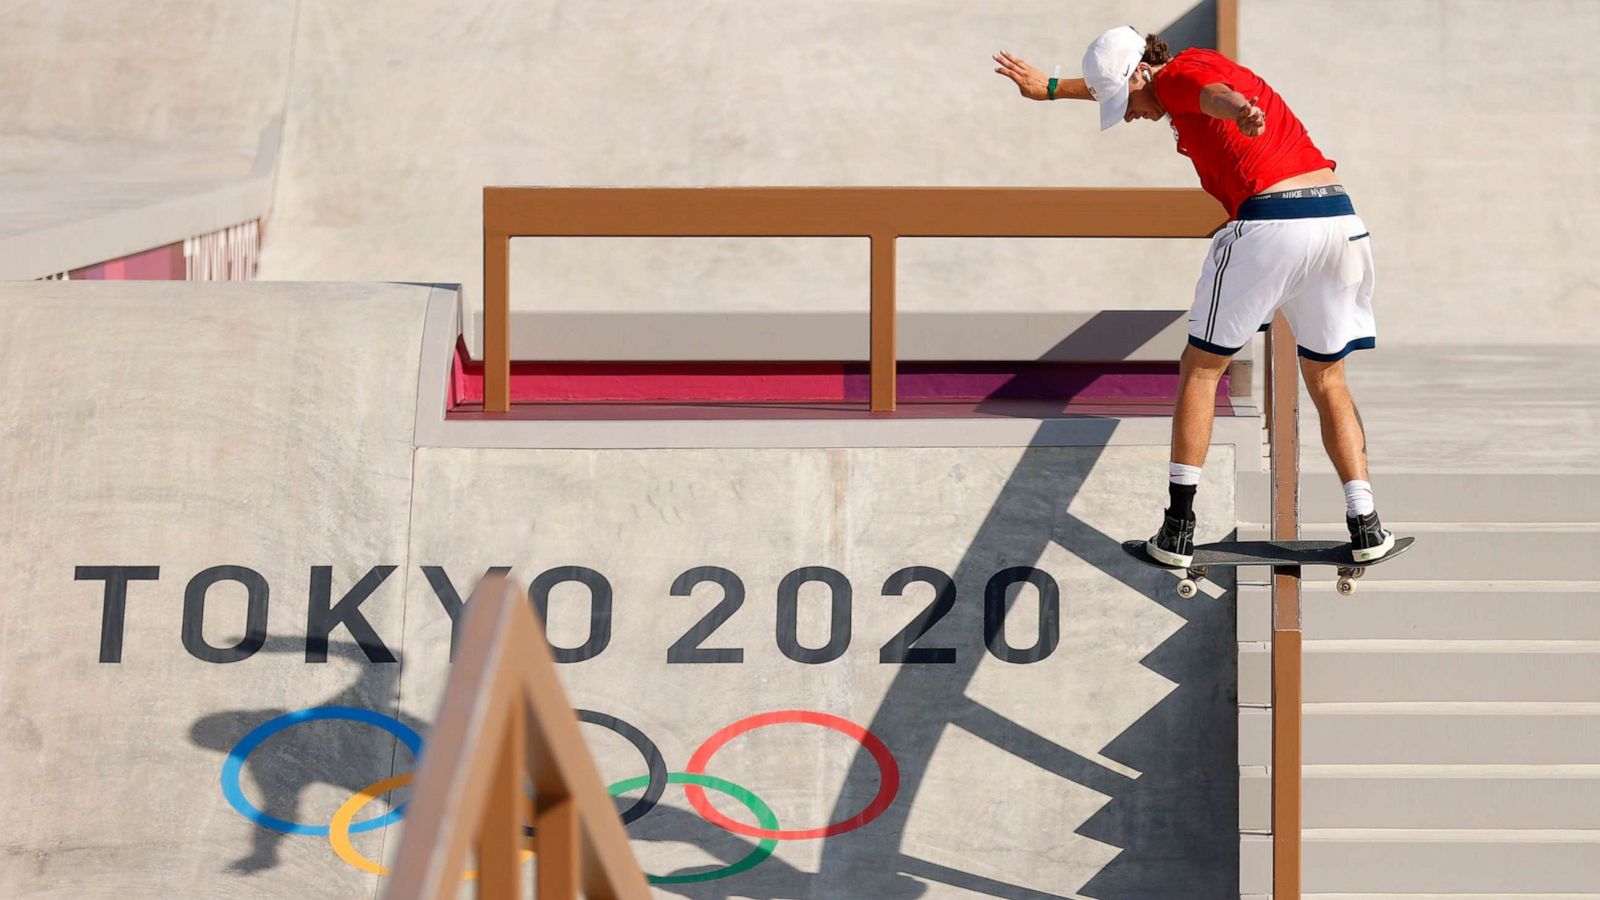 Get ready for the Tokyo 2020 Olympics with Google and